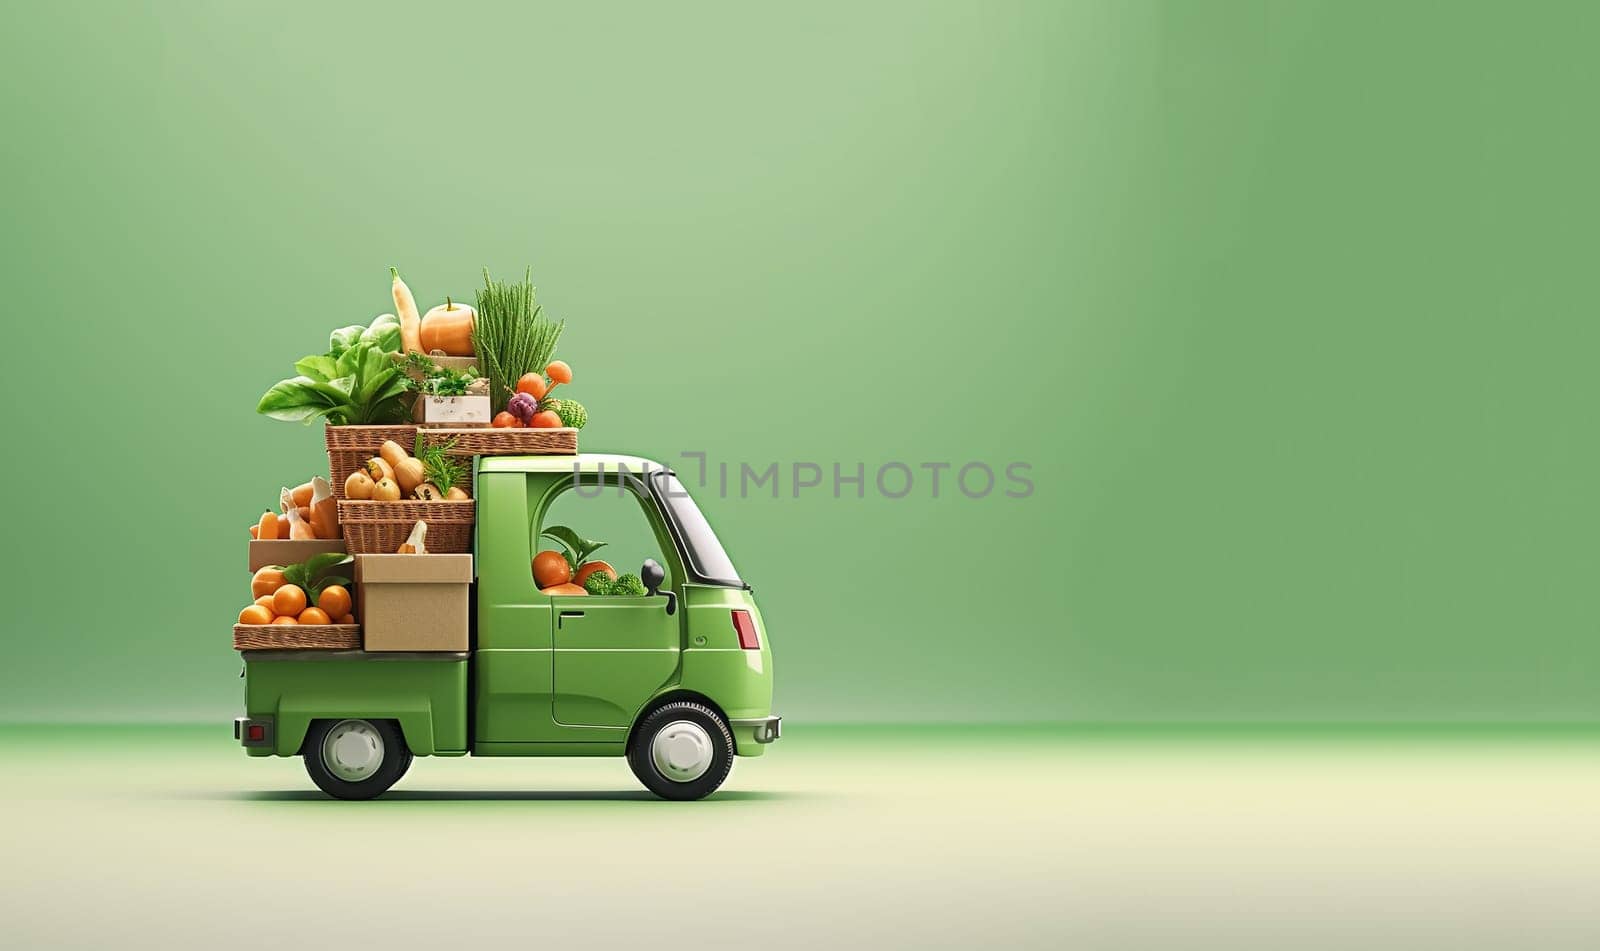 Fast delivery service car driving with order business background concept. Home delivery fresh vegetables in basket. food delivery service. groceries box service with copy space.